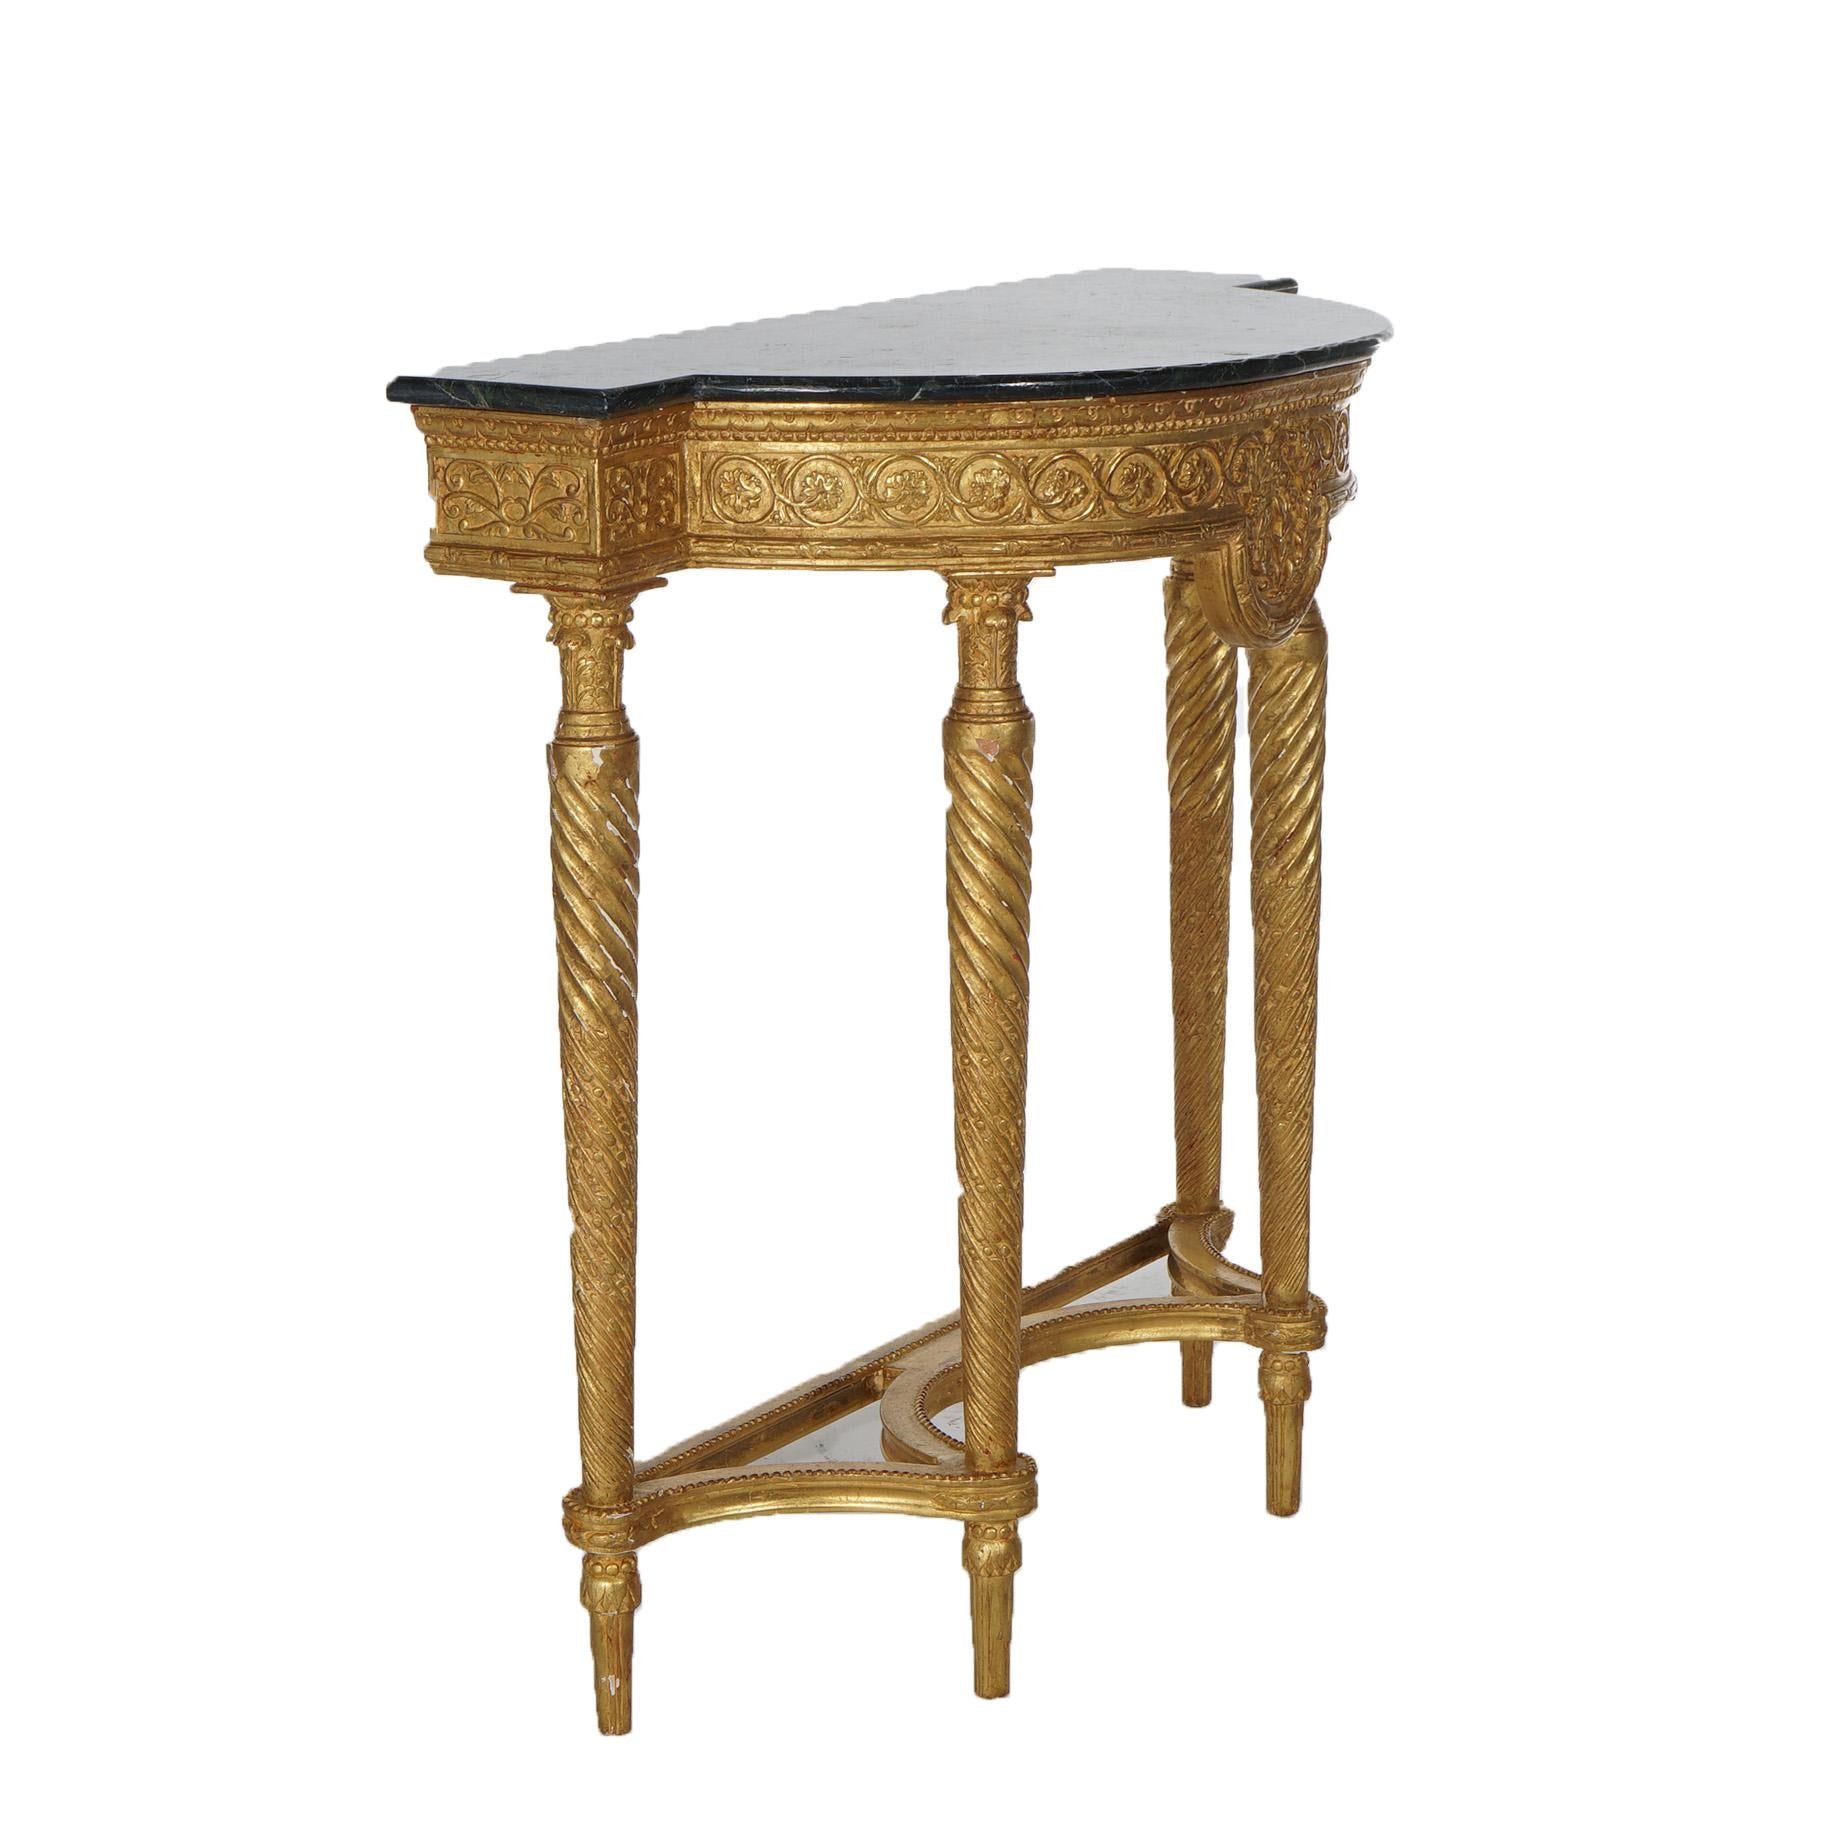 20th Century Antique French Louis XVI Style Giltwood & Marble Top  Demilune Hall Table C1900